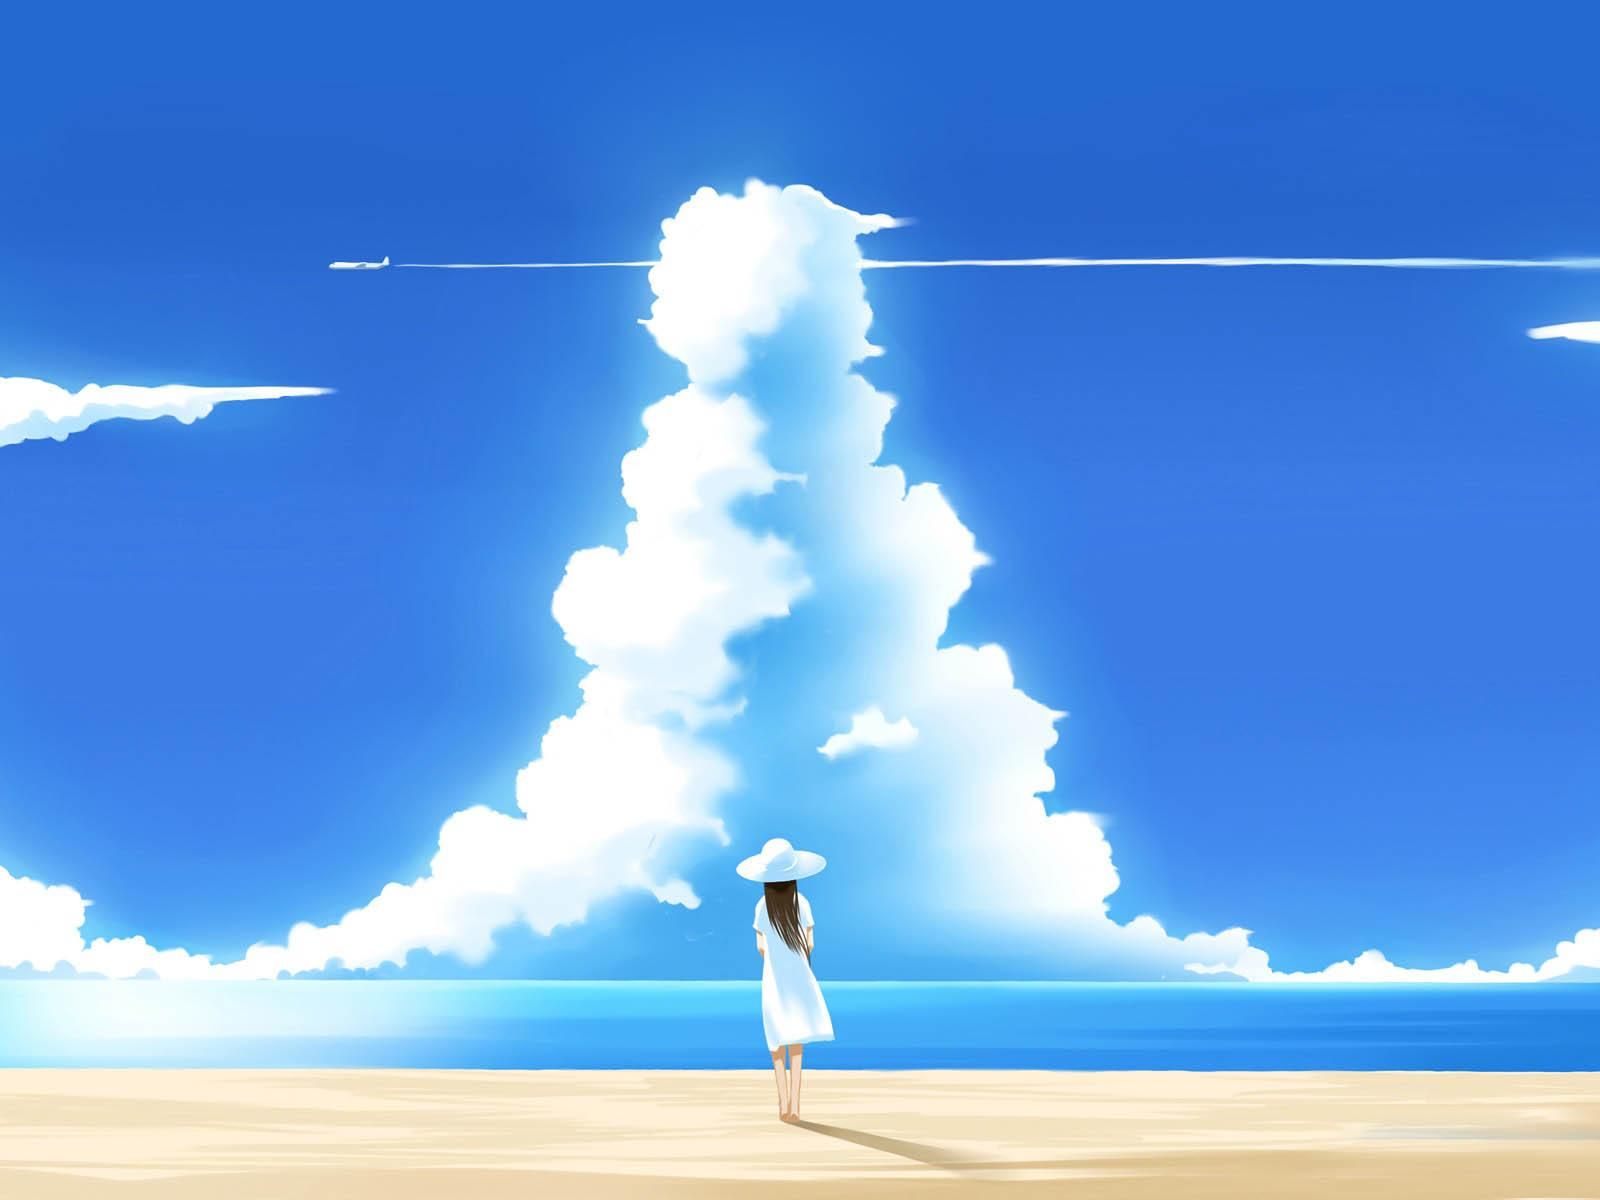 Free download anime beautiful summer day illustration background wallpaperjpg [1600x1200] for your Desktop, Mobile & Tablet. Explore Free Wallpaper That Says Summer. Beautiful Desktop Wallpaper and Background, Free Summer